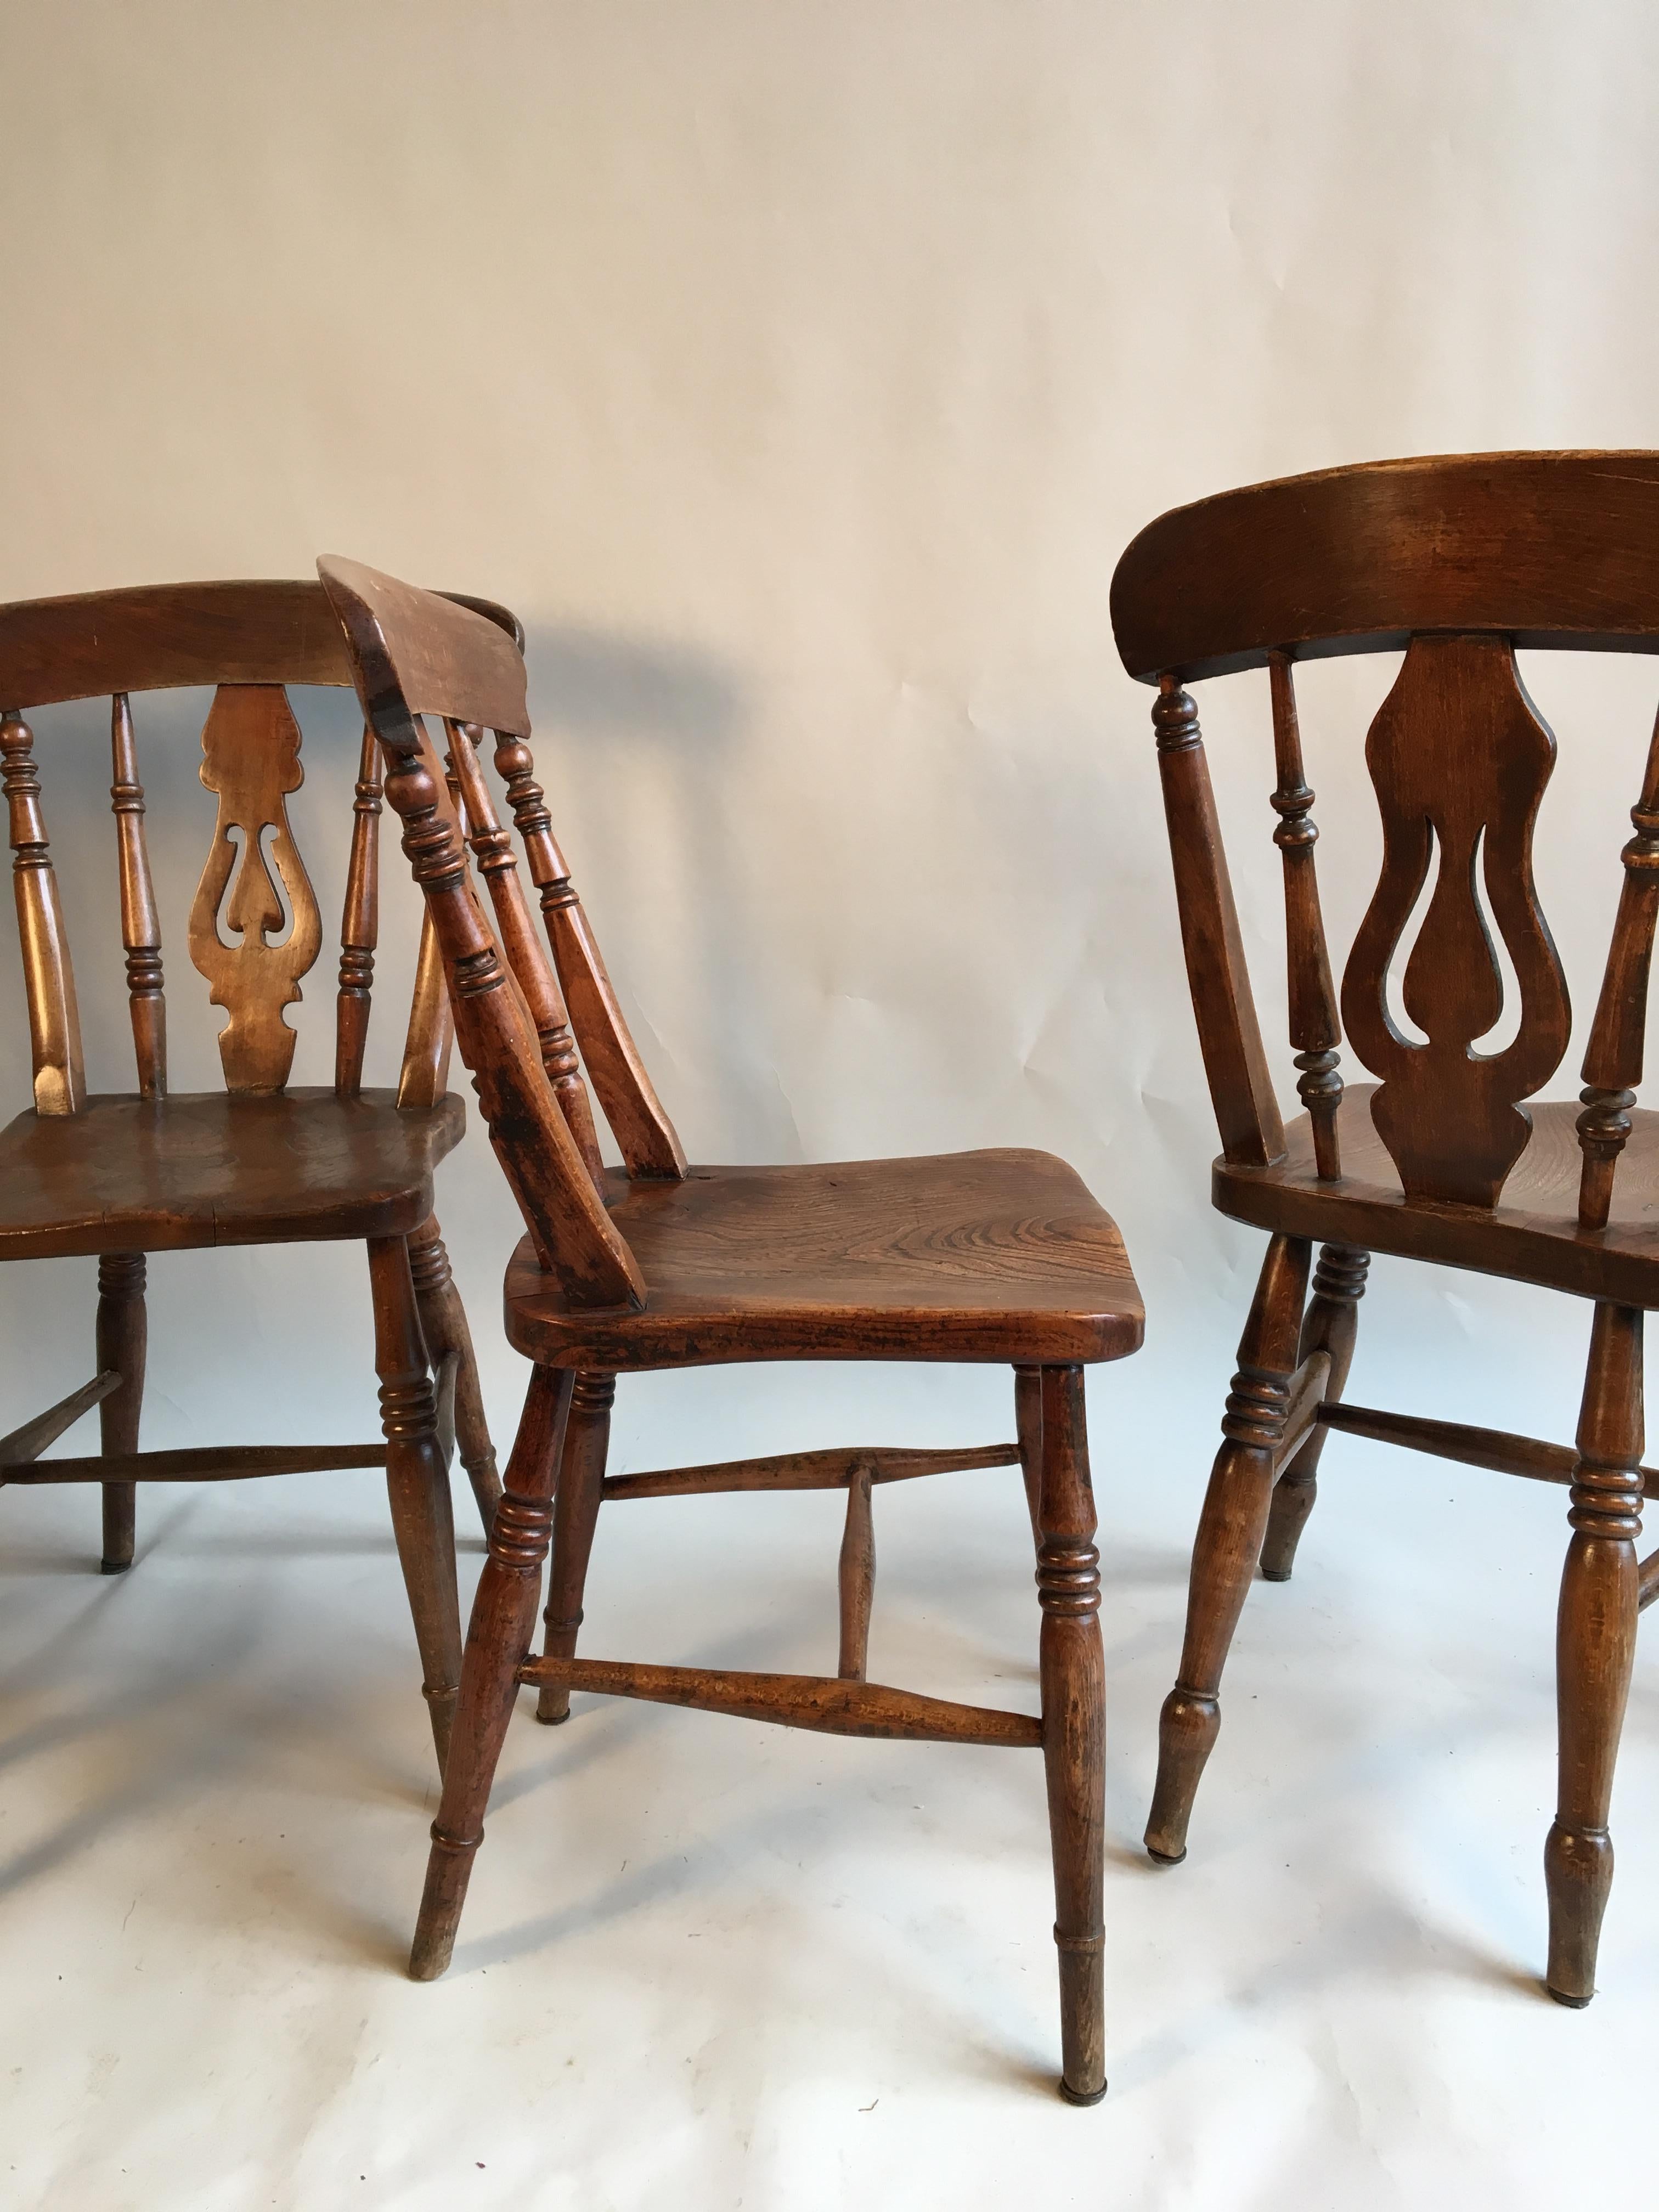 Set of 4 English Country Chairs, 19th Century 2